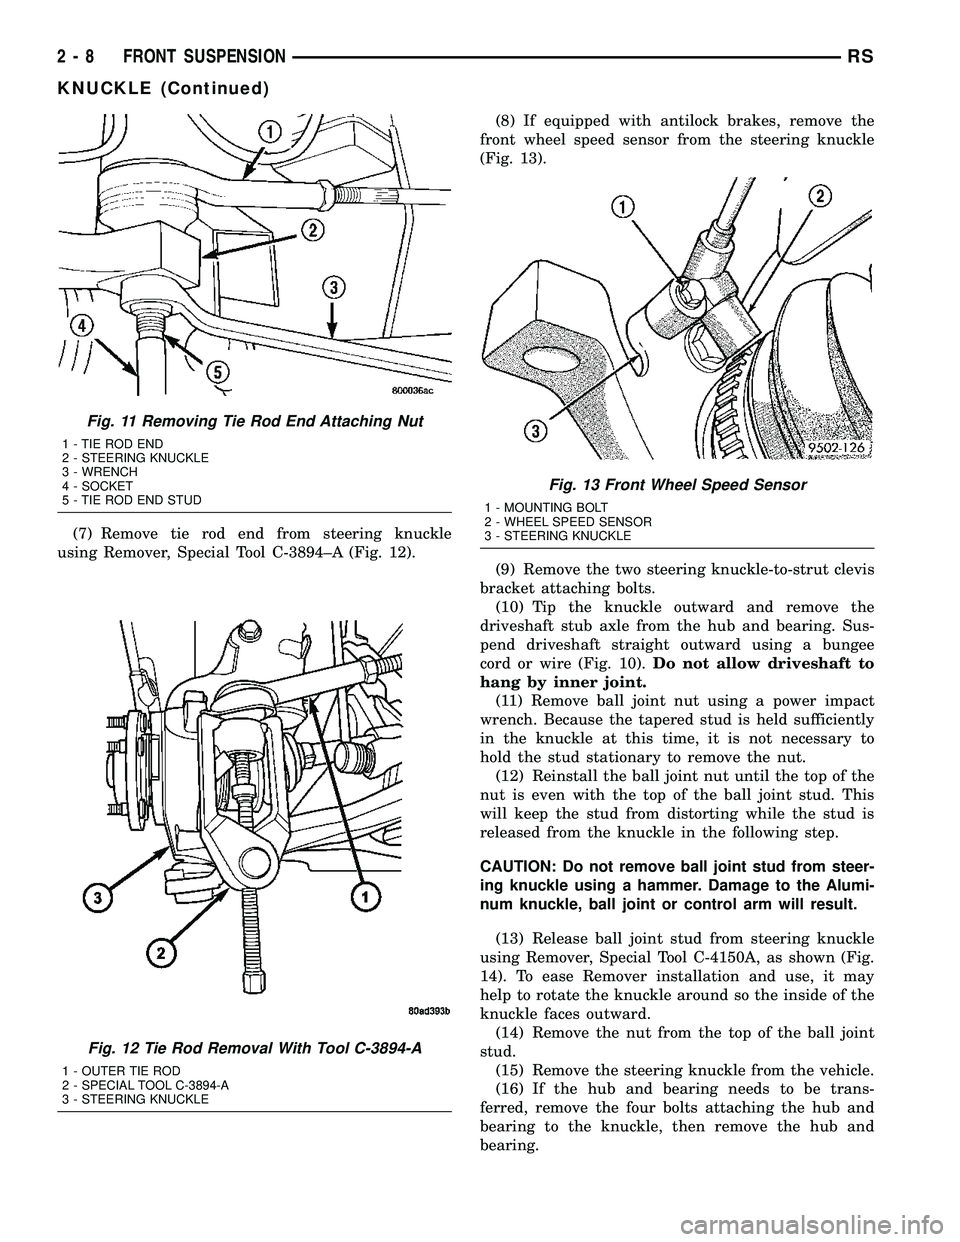 CHRYSLER CARAVAN 2005  Service Manual (7) Remove tie rod end from steering knuckle
using Remover, Special Tool C-3894±A (Fig. 12).(8) If equipped with antilock brakes, remove the
front wheel speed sensor from the steering knuckle
(Fig. 1